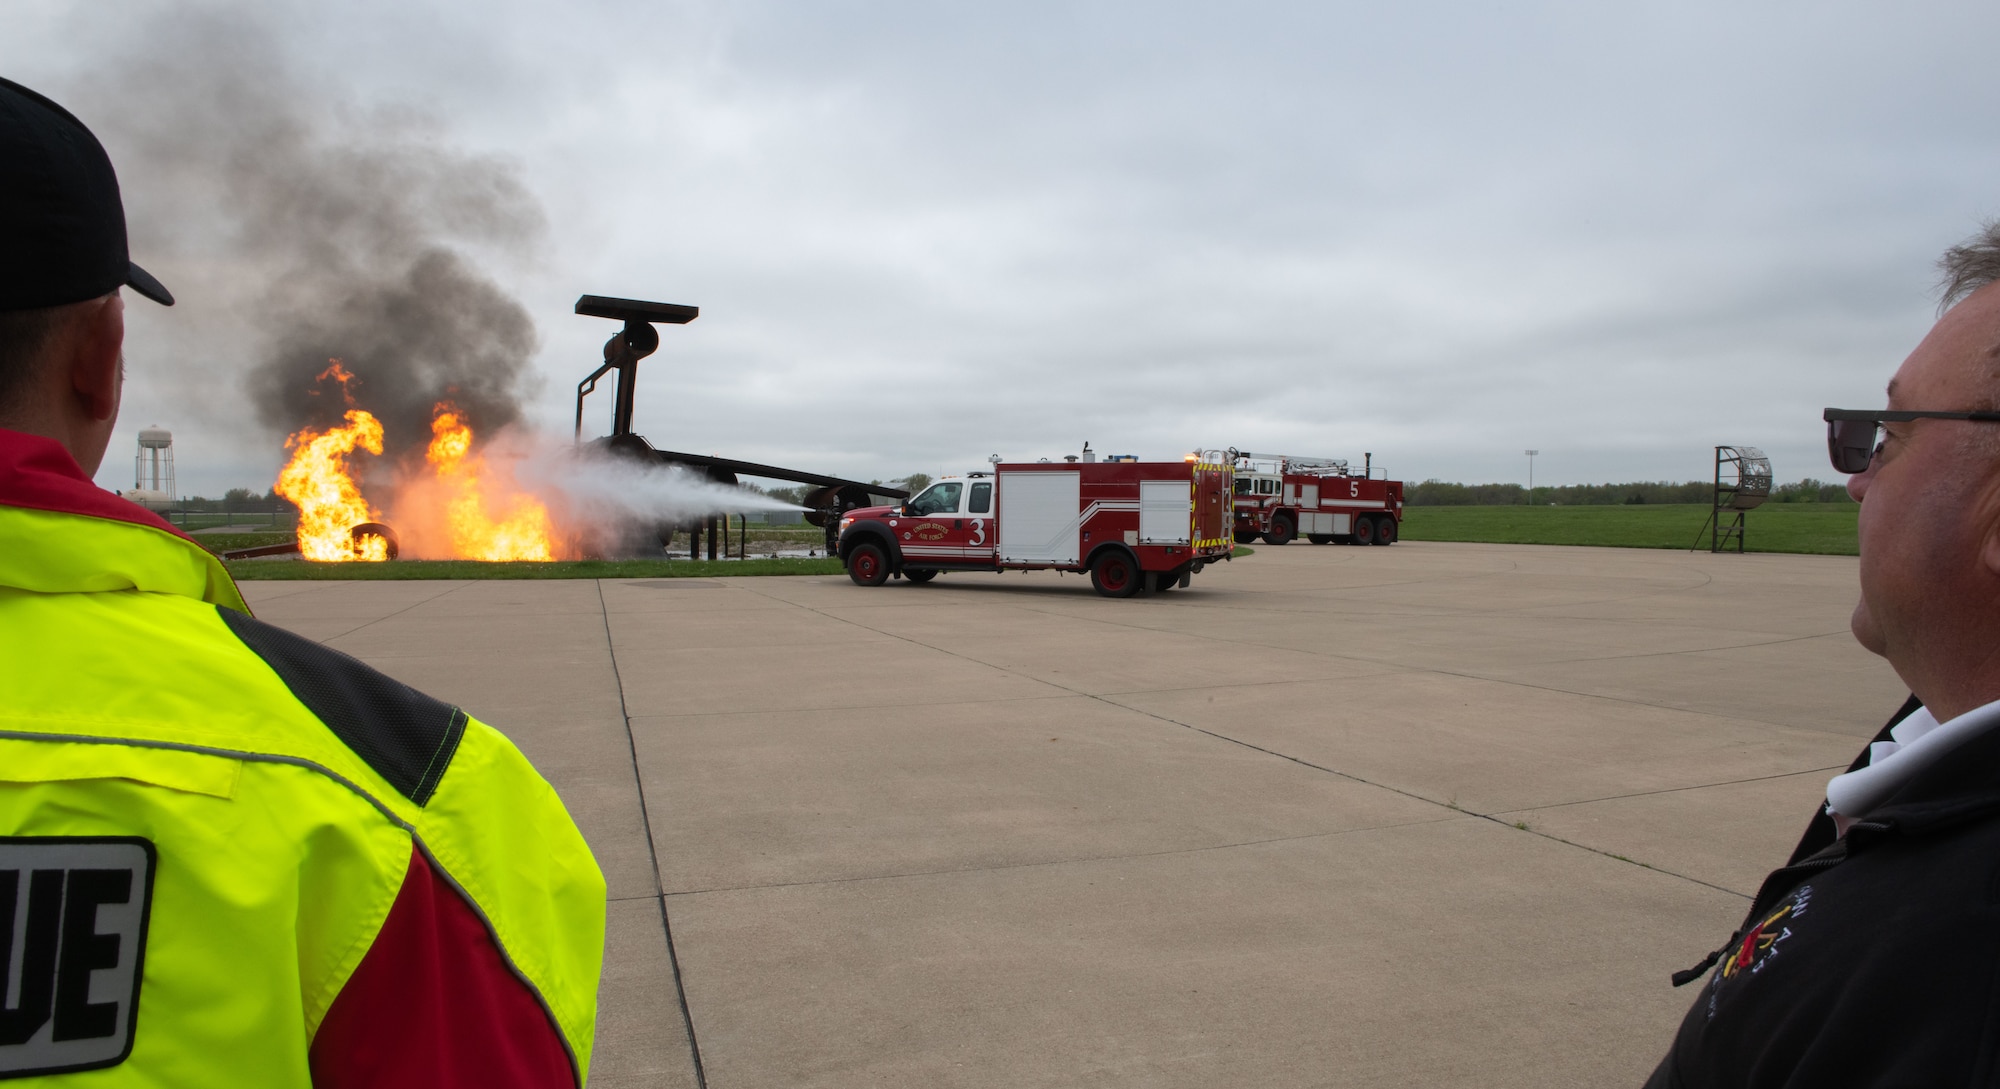 Fire protection specialists assigned to the 509th Civil Engineering Squadron conduct a training demonstration for a group of kindergarteners from Whiteman Elementary School during a base field trip on Whiteman Air Force Base, Missouri, May 4, 2022. The students toured various facilities on base receiving demonstrations from security forces and the fire department. (U.S. Air Force photo by Airman 1st Class Bryson Britt)